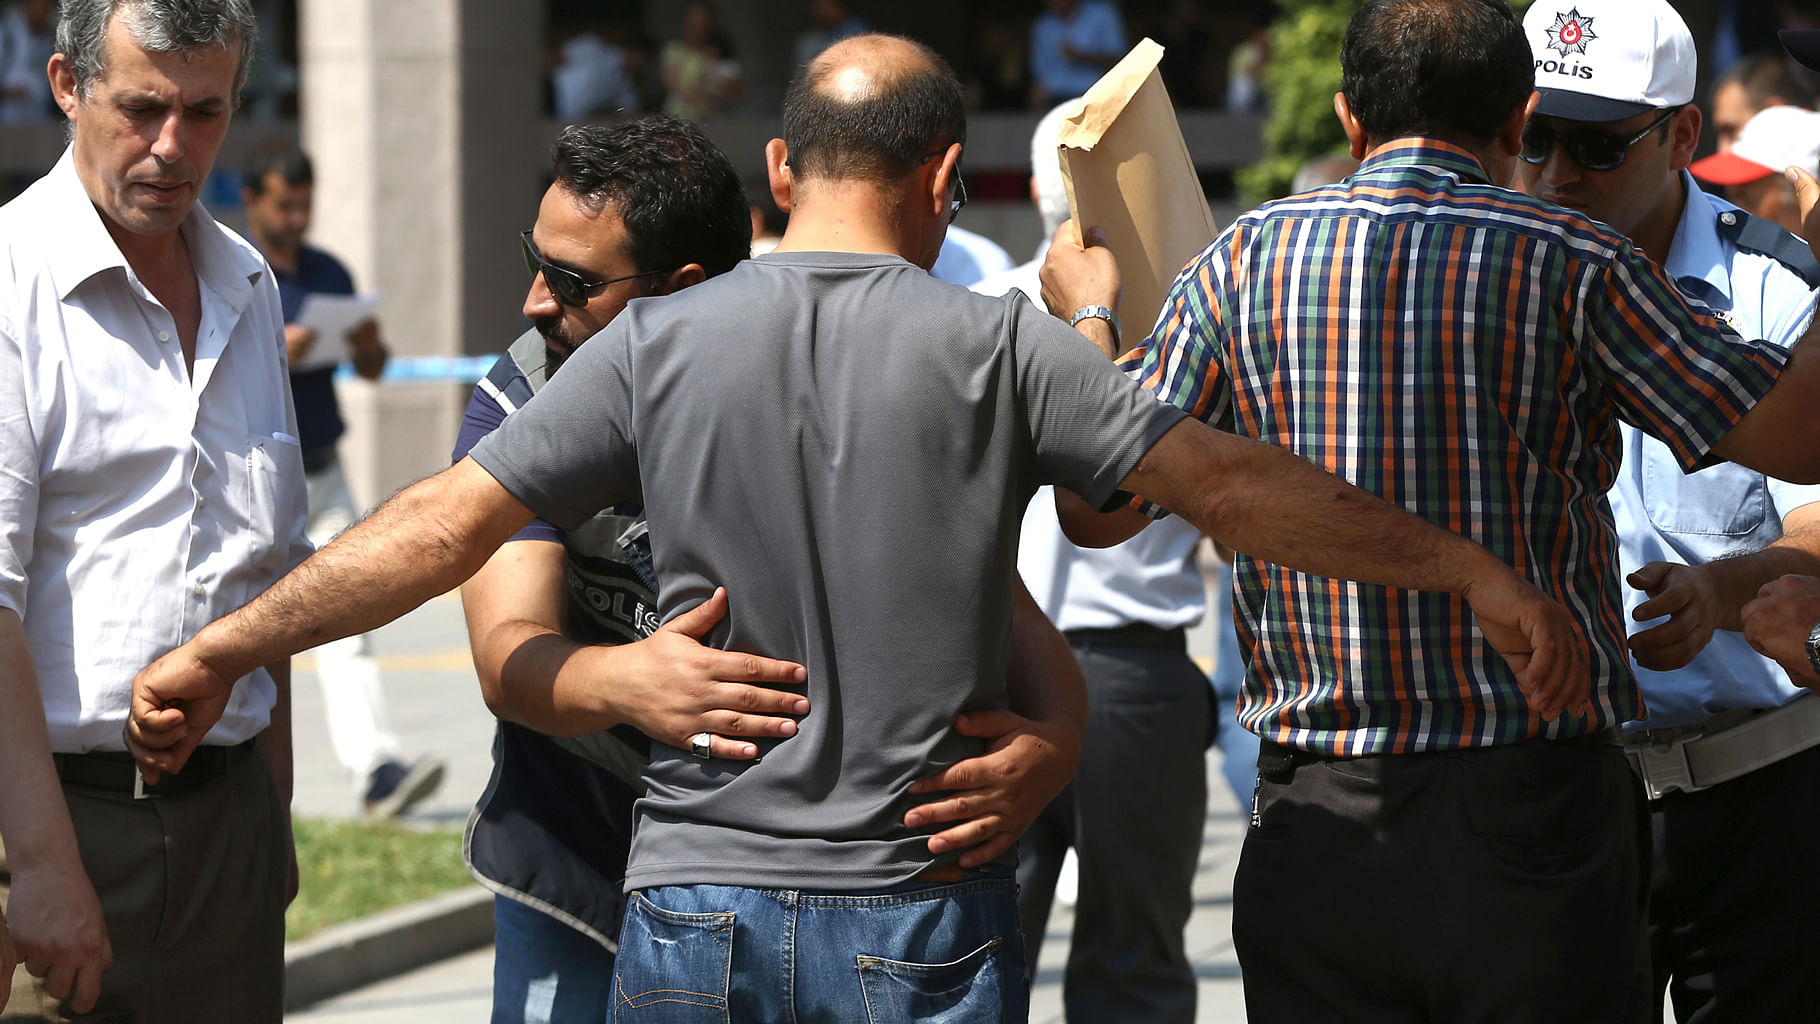 A Turkish policeman searches a man at the entrance of the courthouse where prosecutors are questioning several generals. (Photo Courtesy: AP)